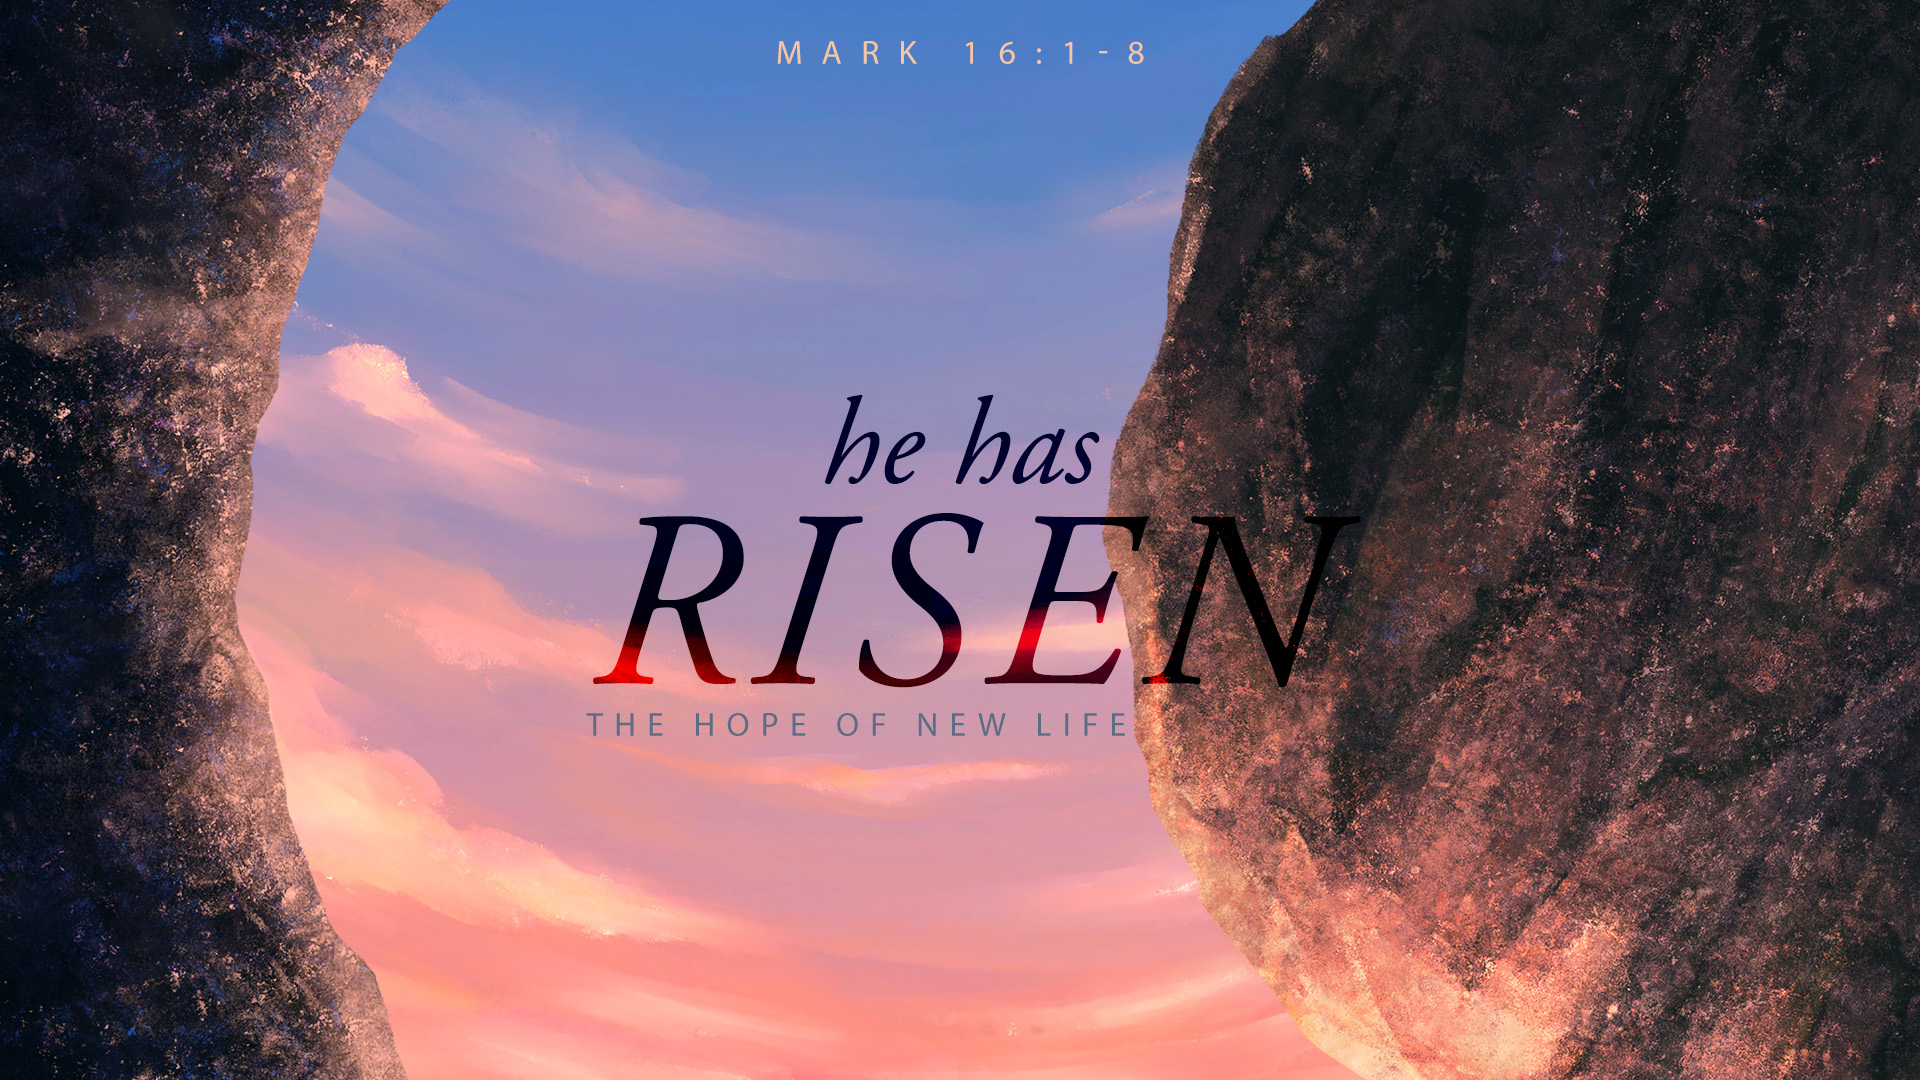 He Has Risen: The Hope of New Life